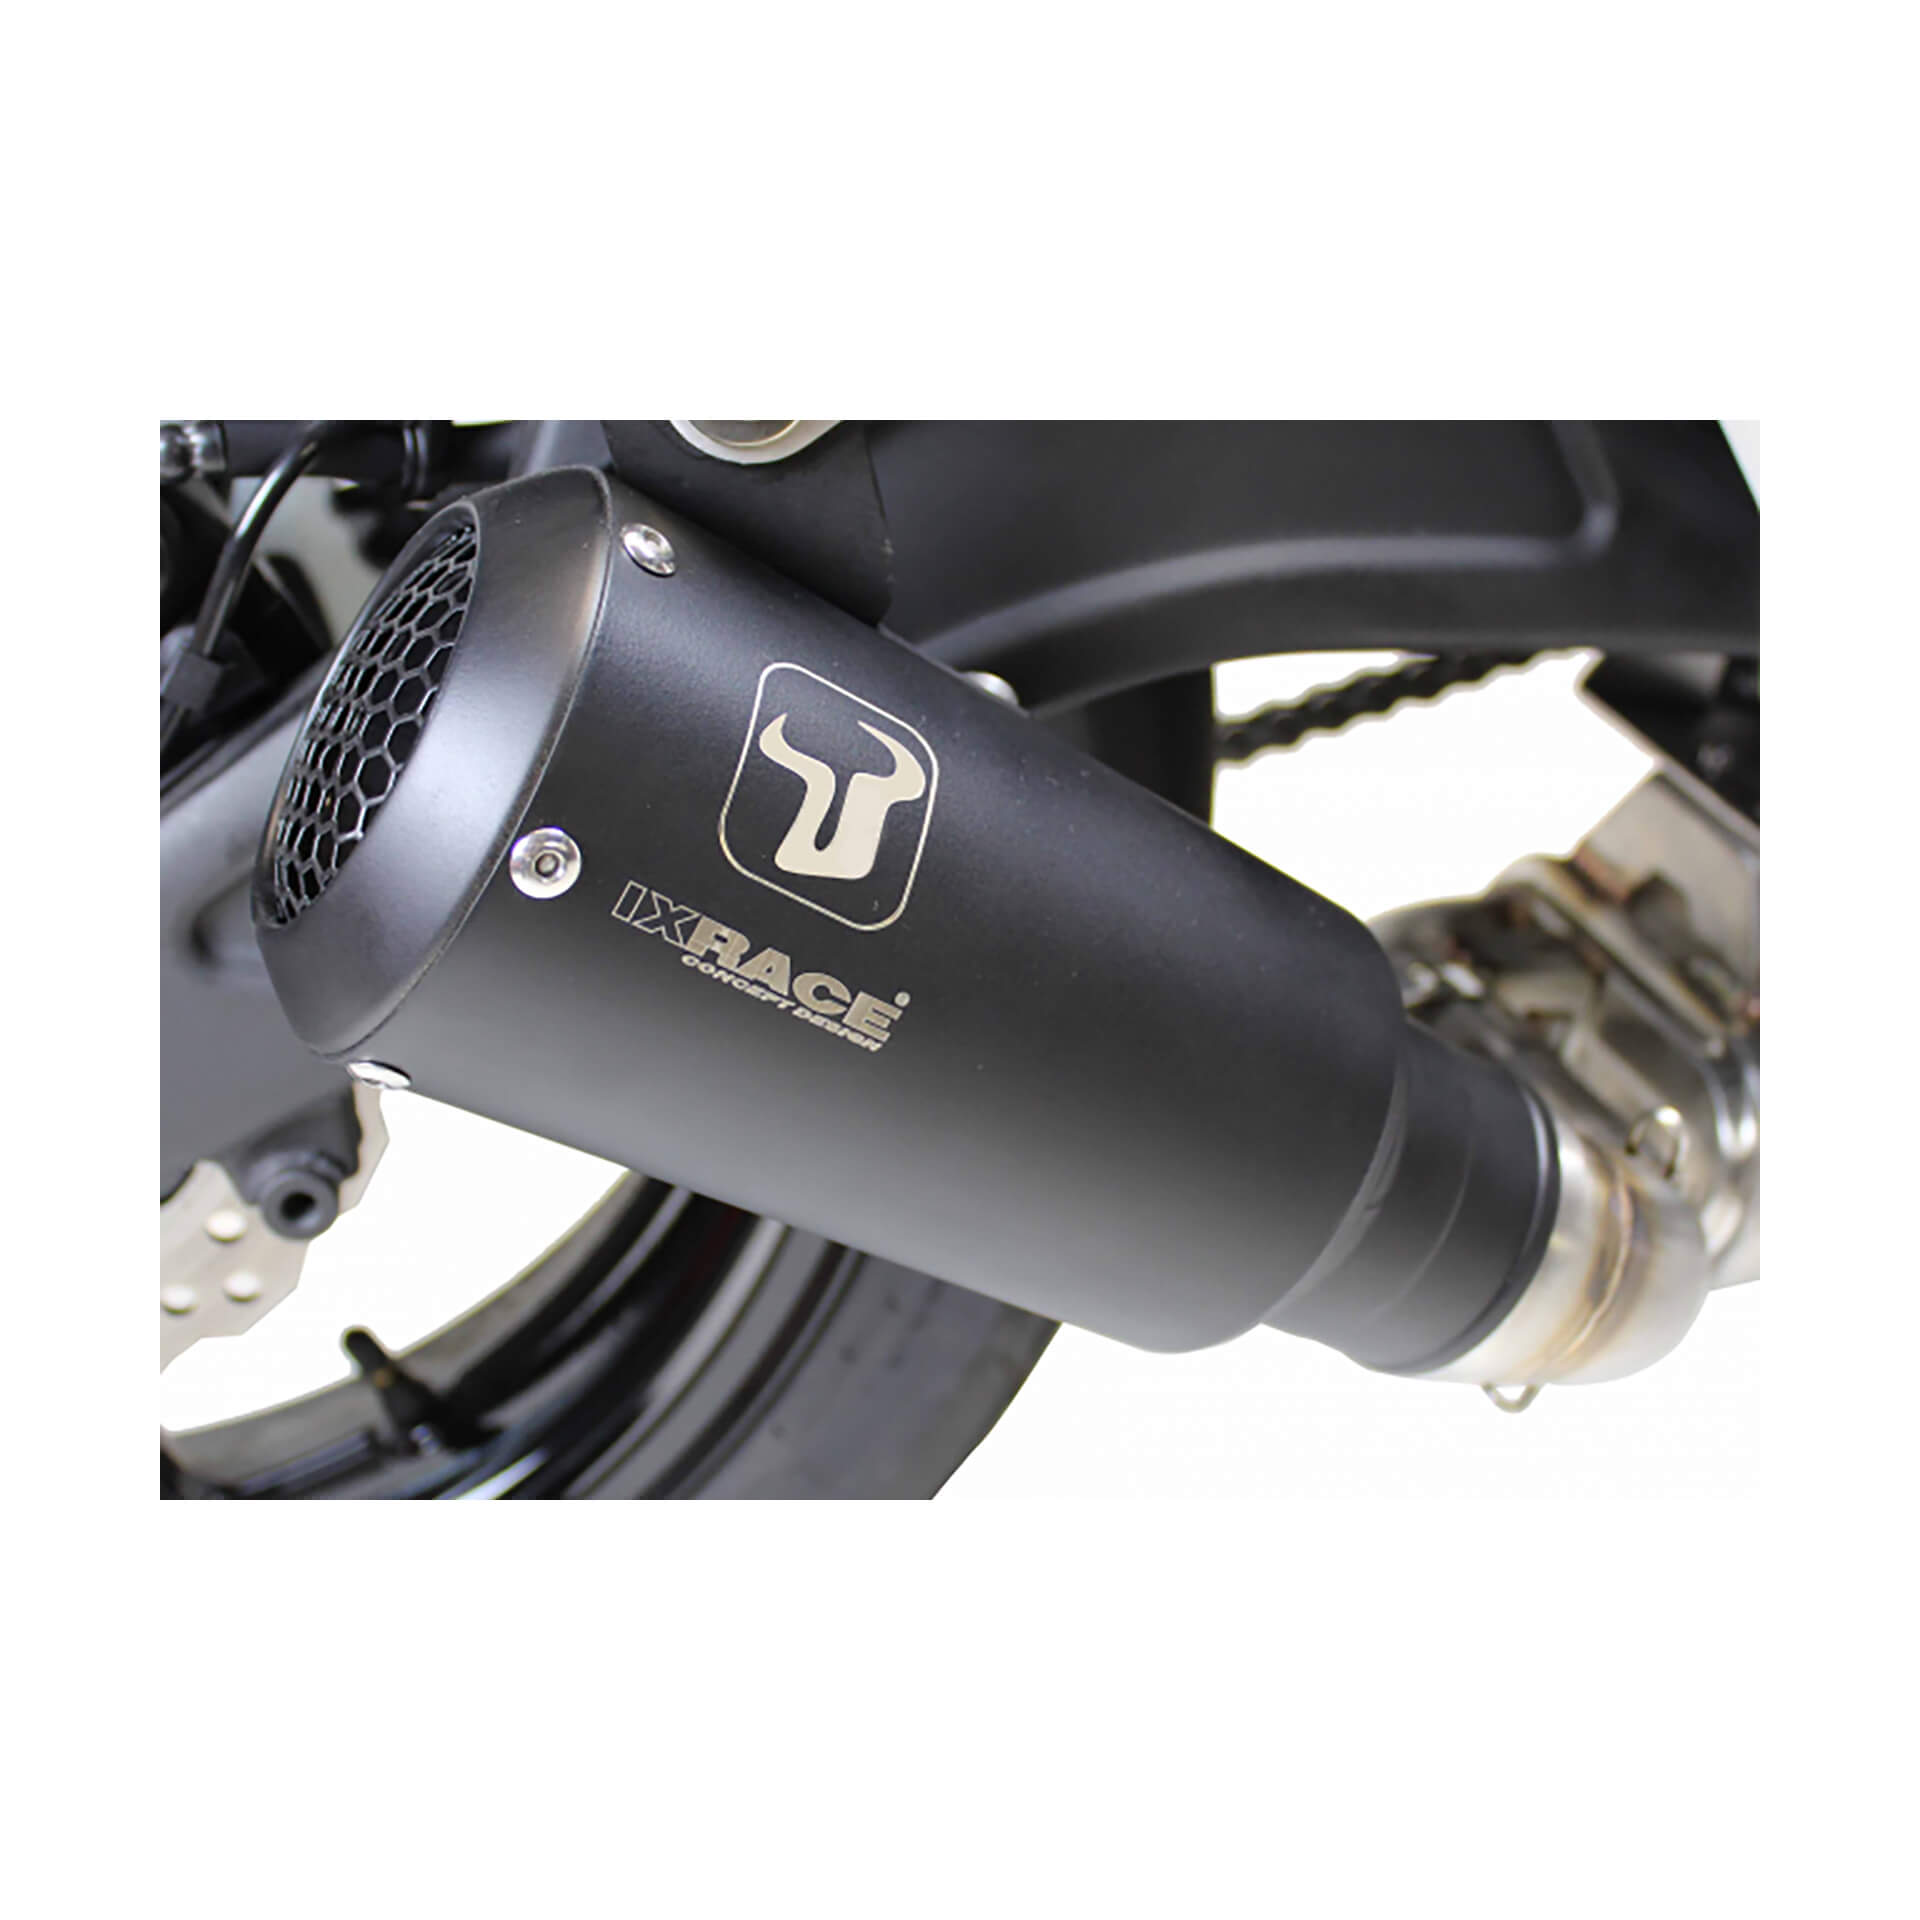 ixrace MK2 stainless steel rear silencer for CF Moto CL-X 700, 19-23 (CF700-2) HERITAGE/SPORT/ADVENTURE Euro 4+�